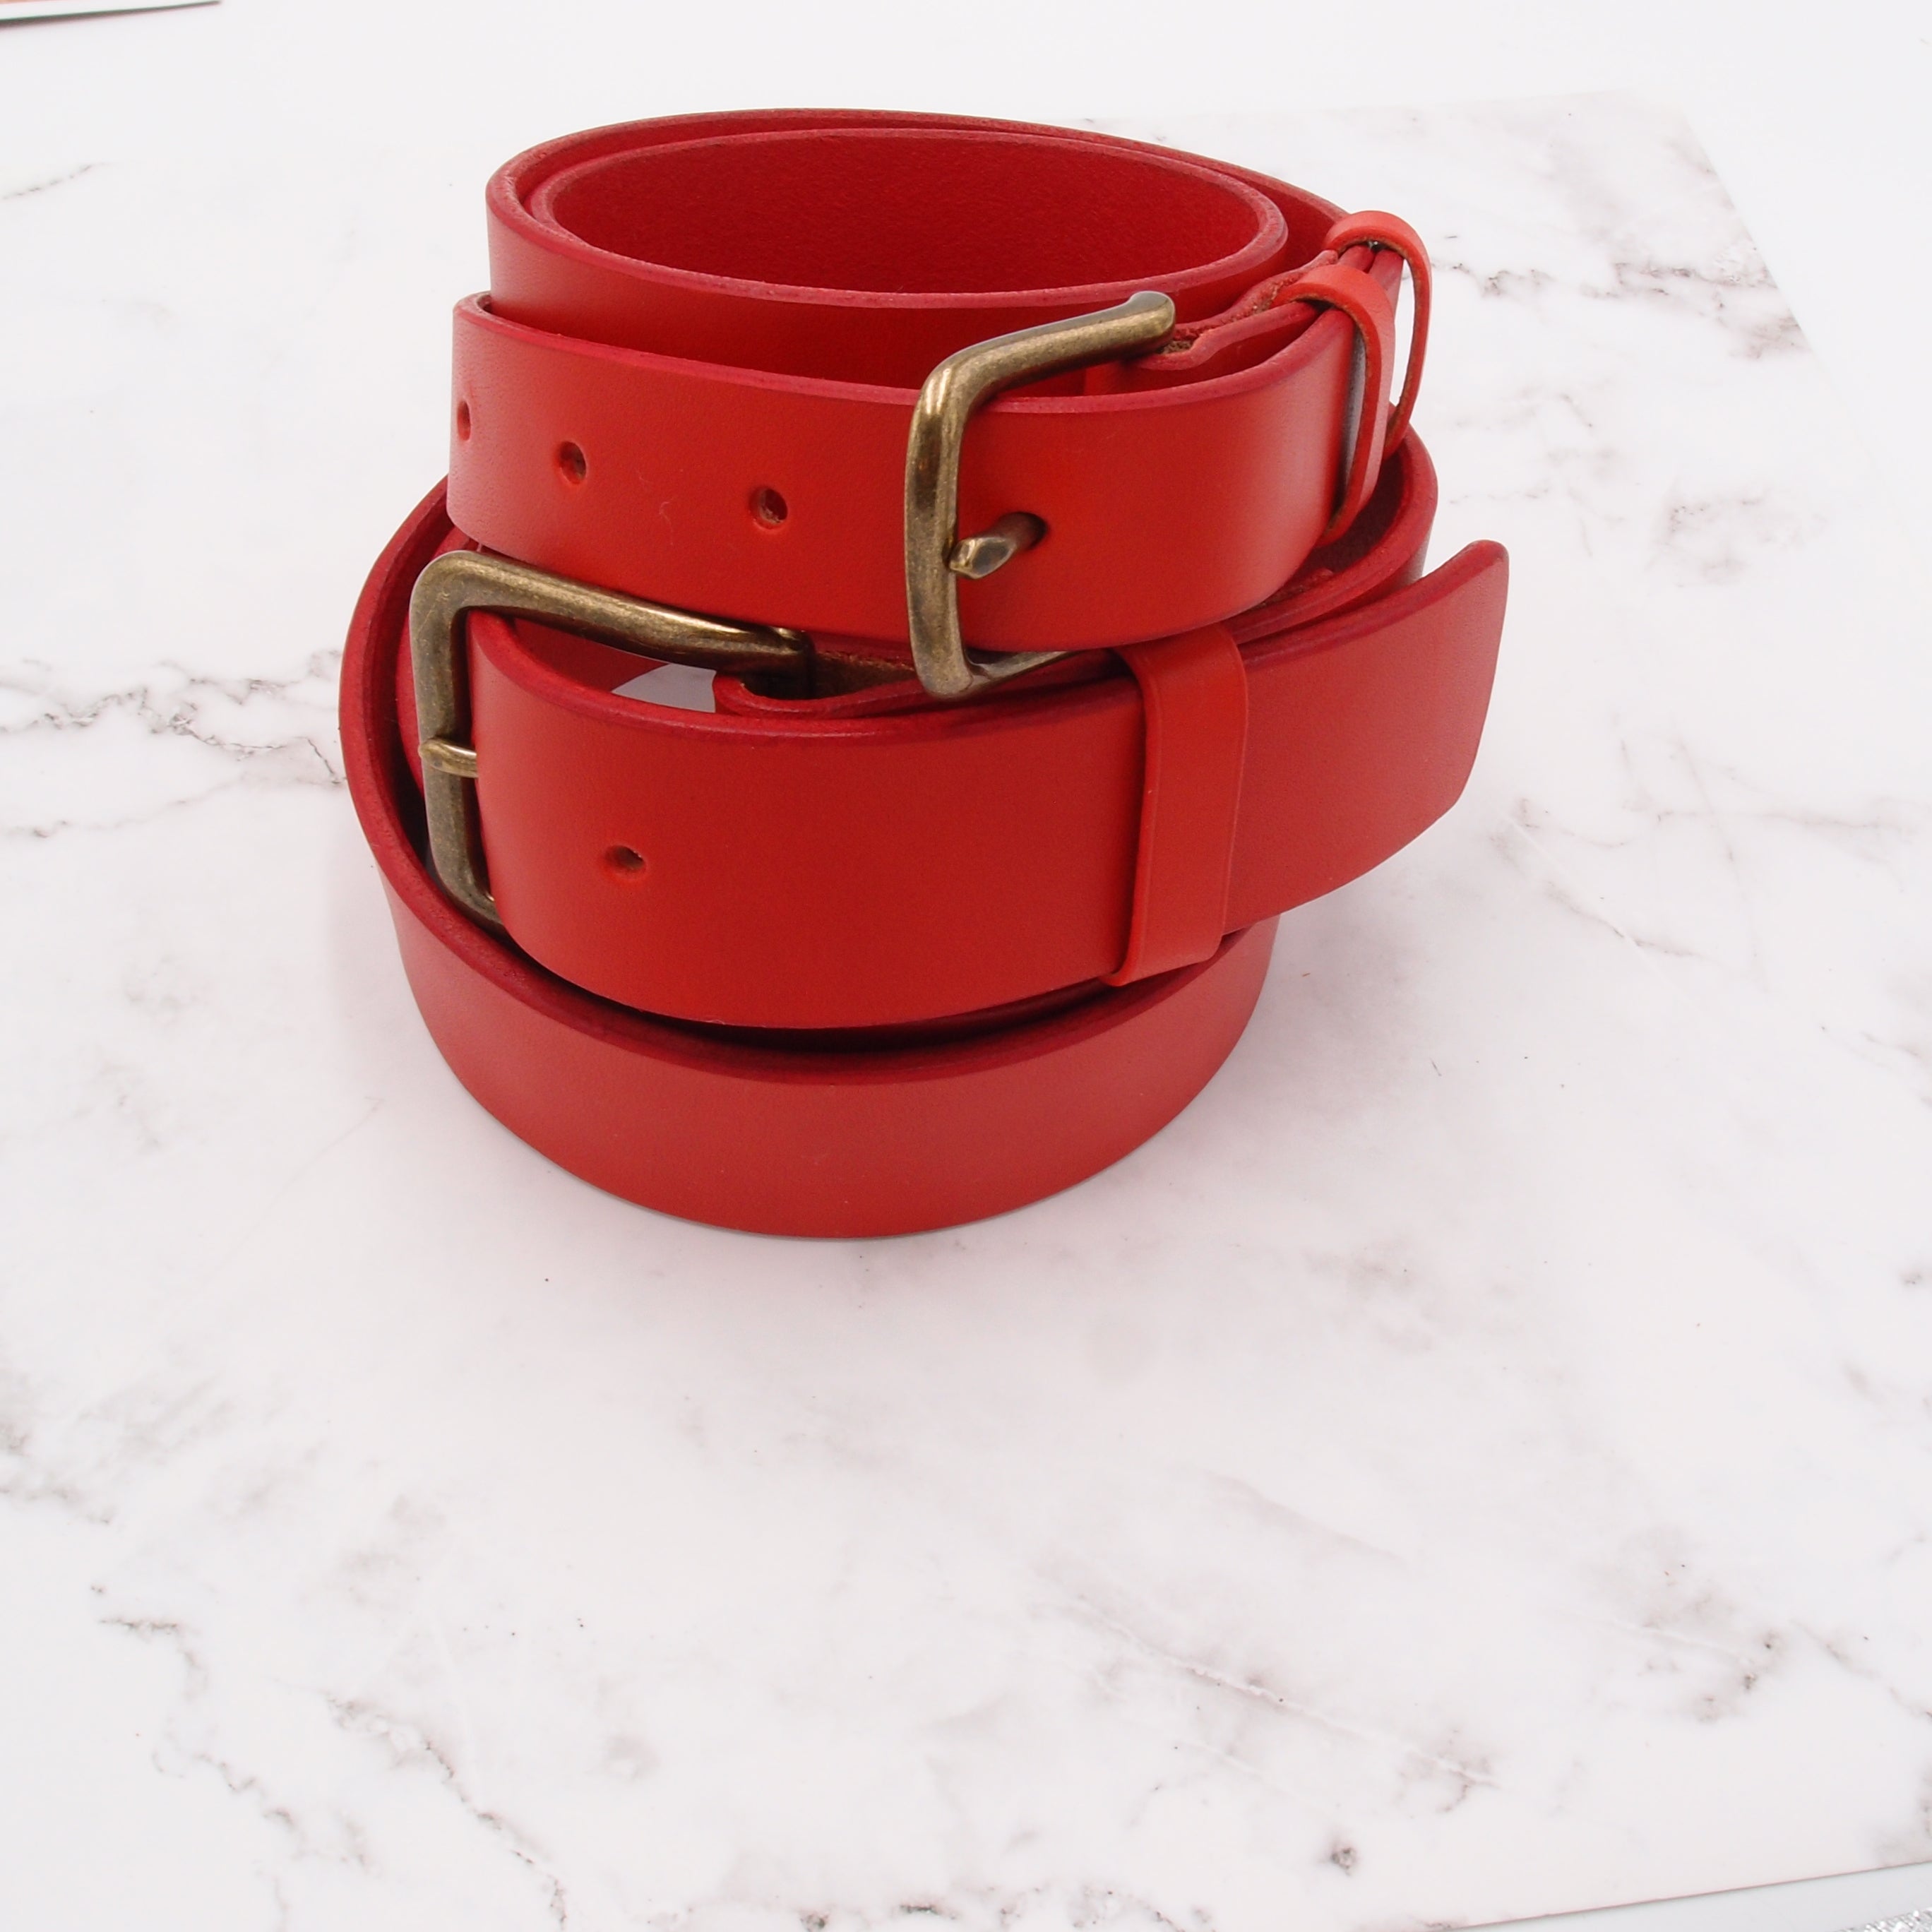 Two Red Leather Belt with Antique Brass Buckles Wrapped in Circles